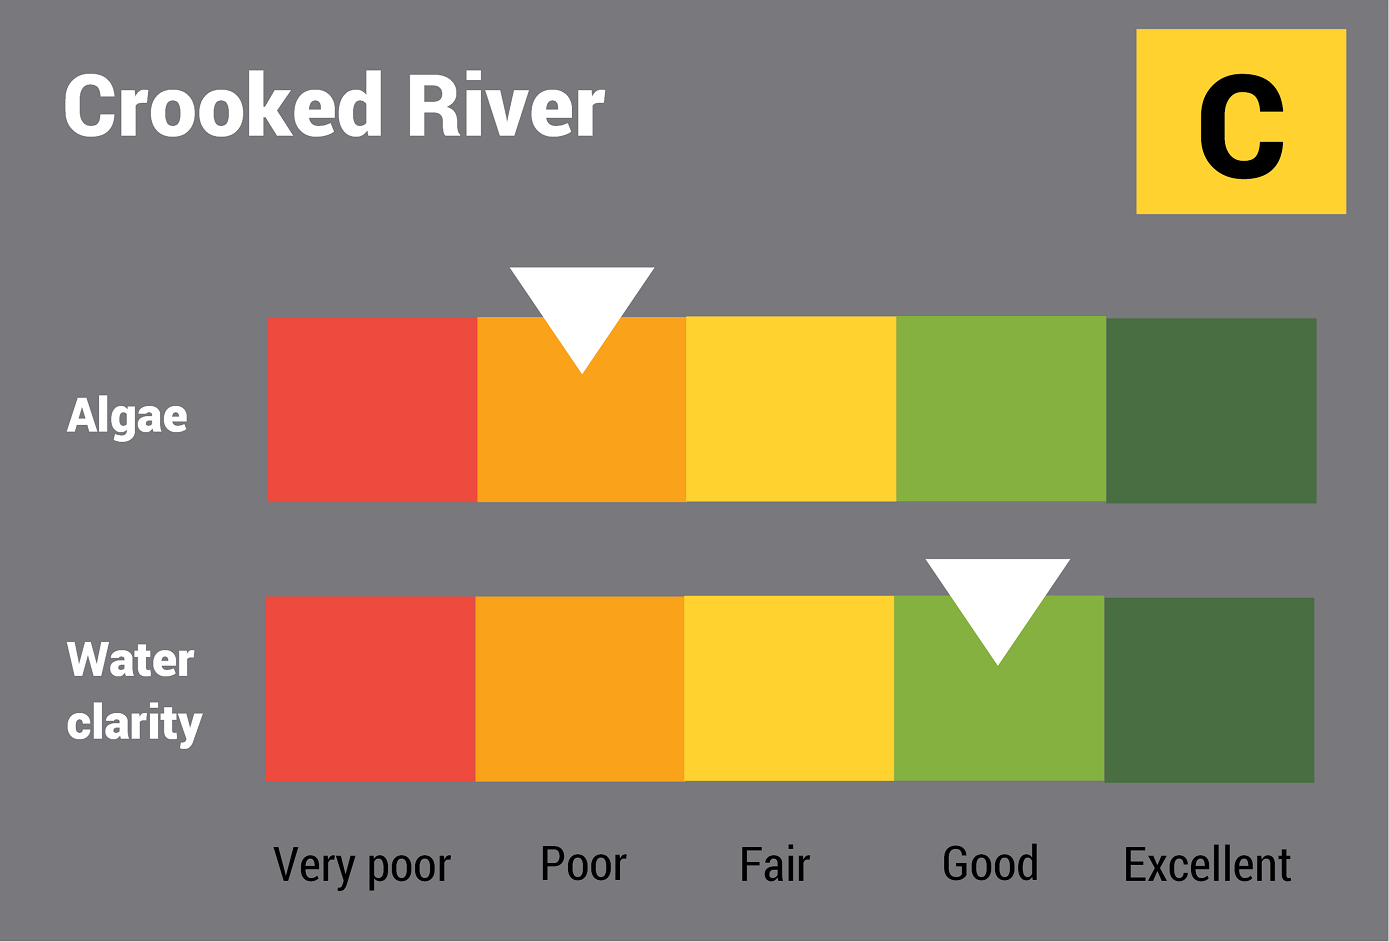 Crooked River water quality report card for algae and water clarity showing colour-coded ratings (red, orange, yellow, light green and dark green, which represent very poor, poor, fair, good and excellent, respectively). Algae is rated 'poor' and water clarity is rated 'good' giving an overall rating of 'fair' or 'C'.